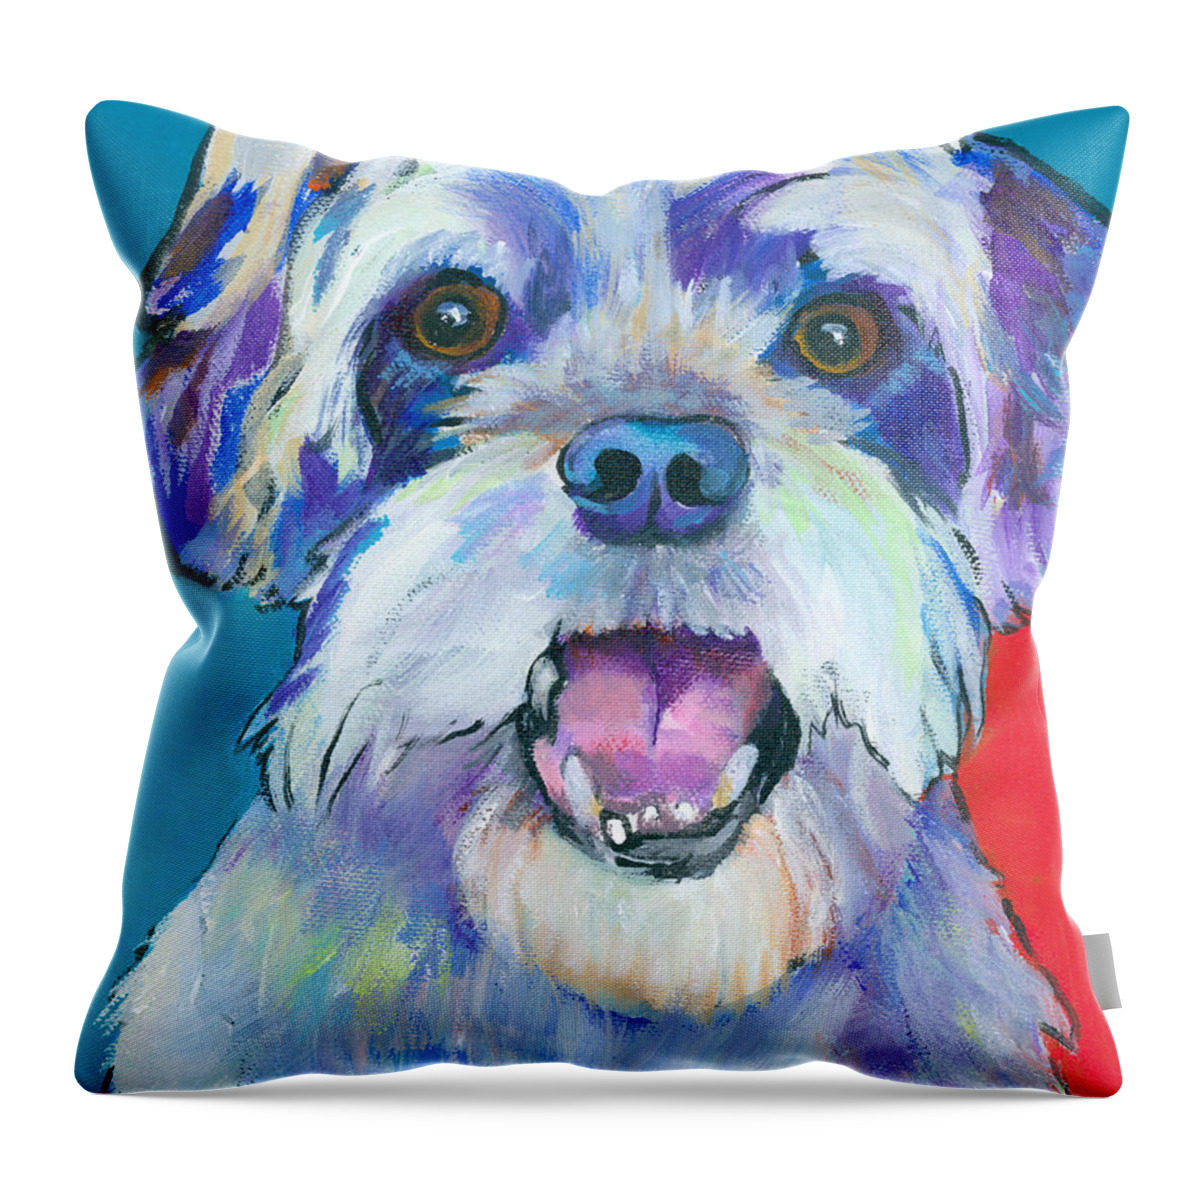 Custom Pet Portraits Throw Pillow featuring the painting Gus by Pat Saunders-White